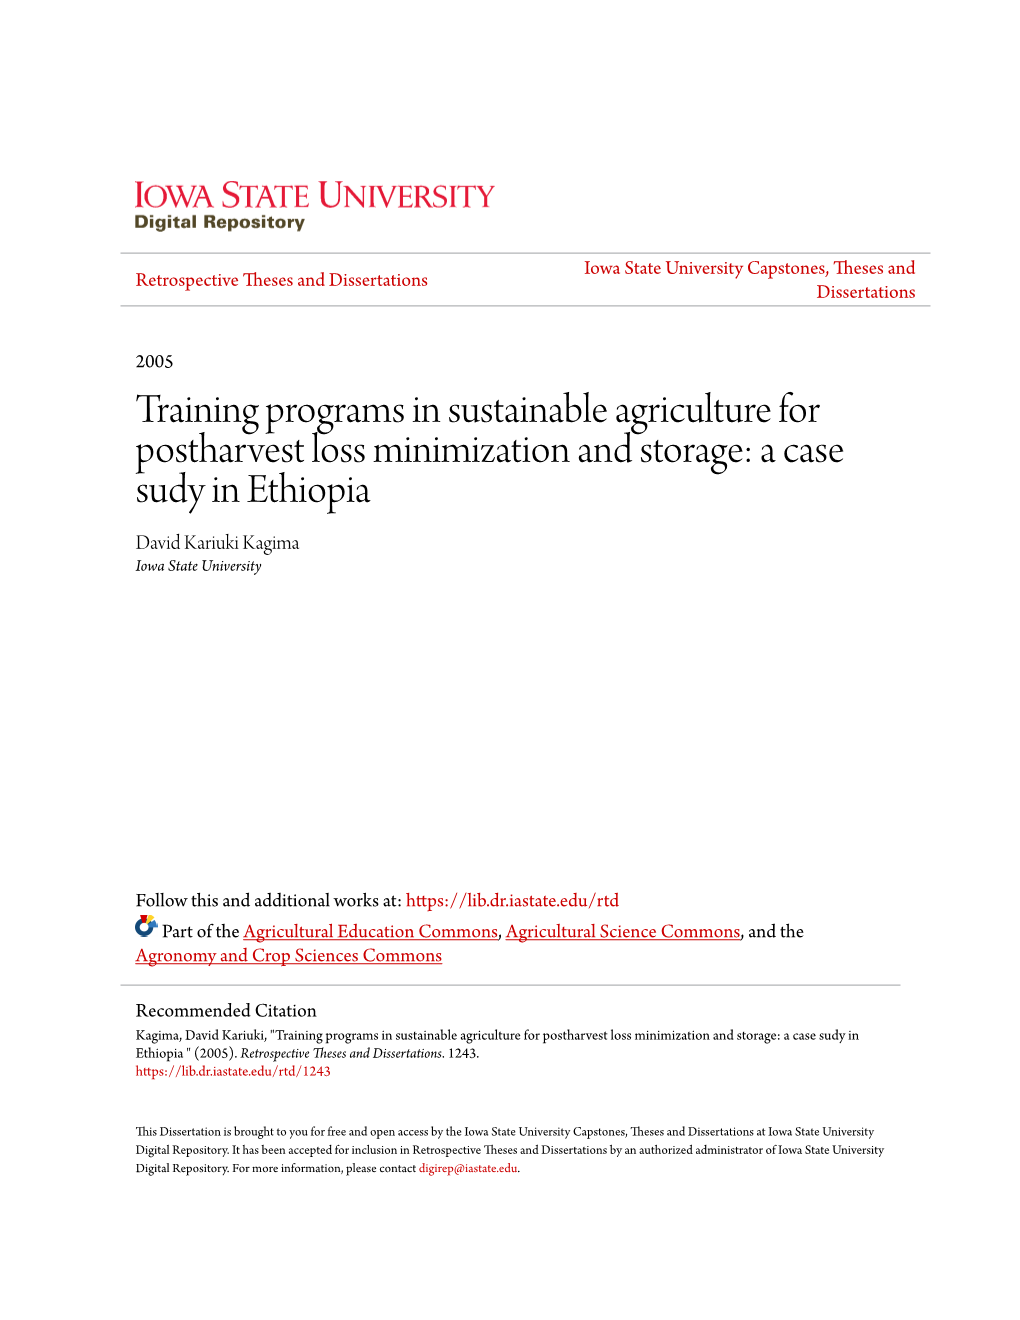 Training Programs in Sustainable Agriculture for Postharvest Loss Minimization and Storage: a Case Sudy in Ethiopia David Kariuki Kagima Iowa State University